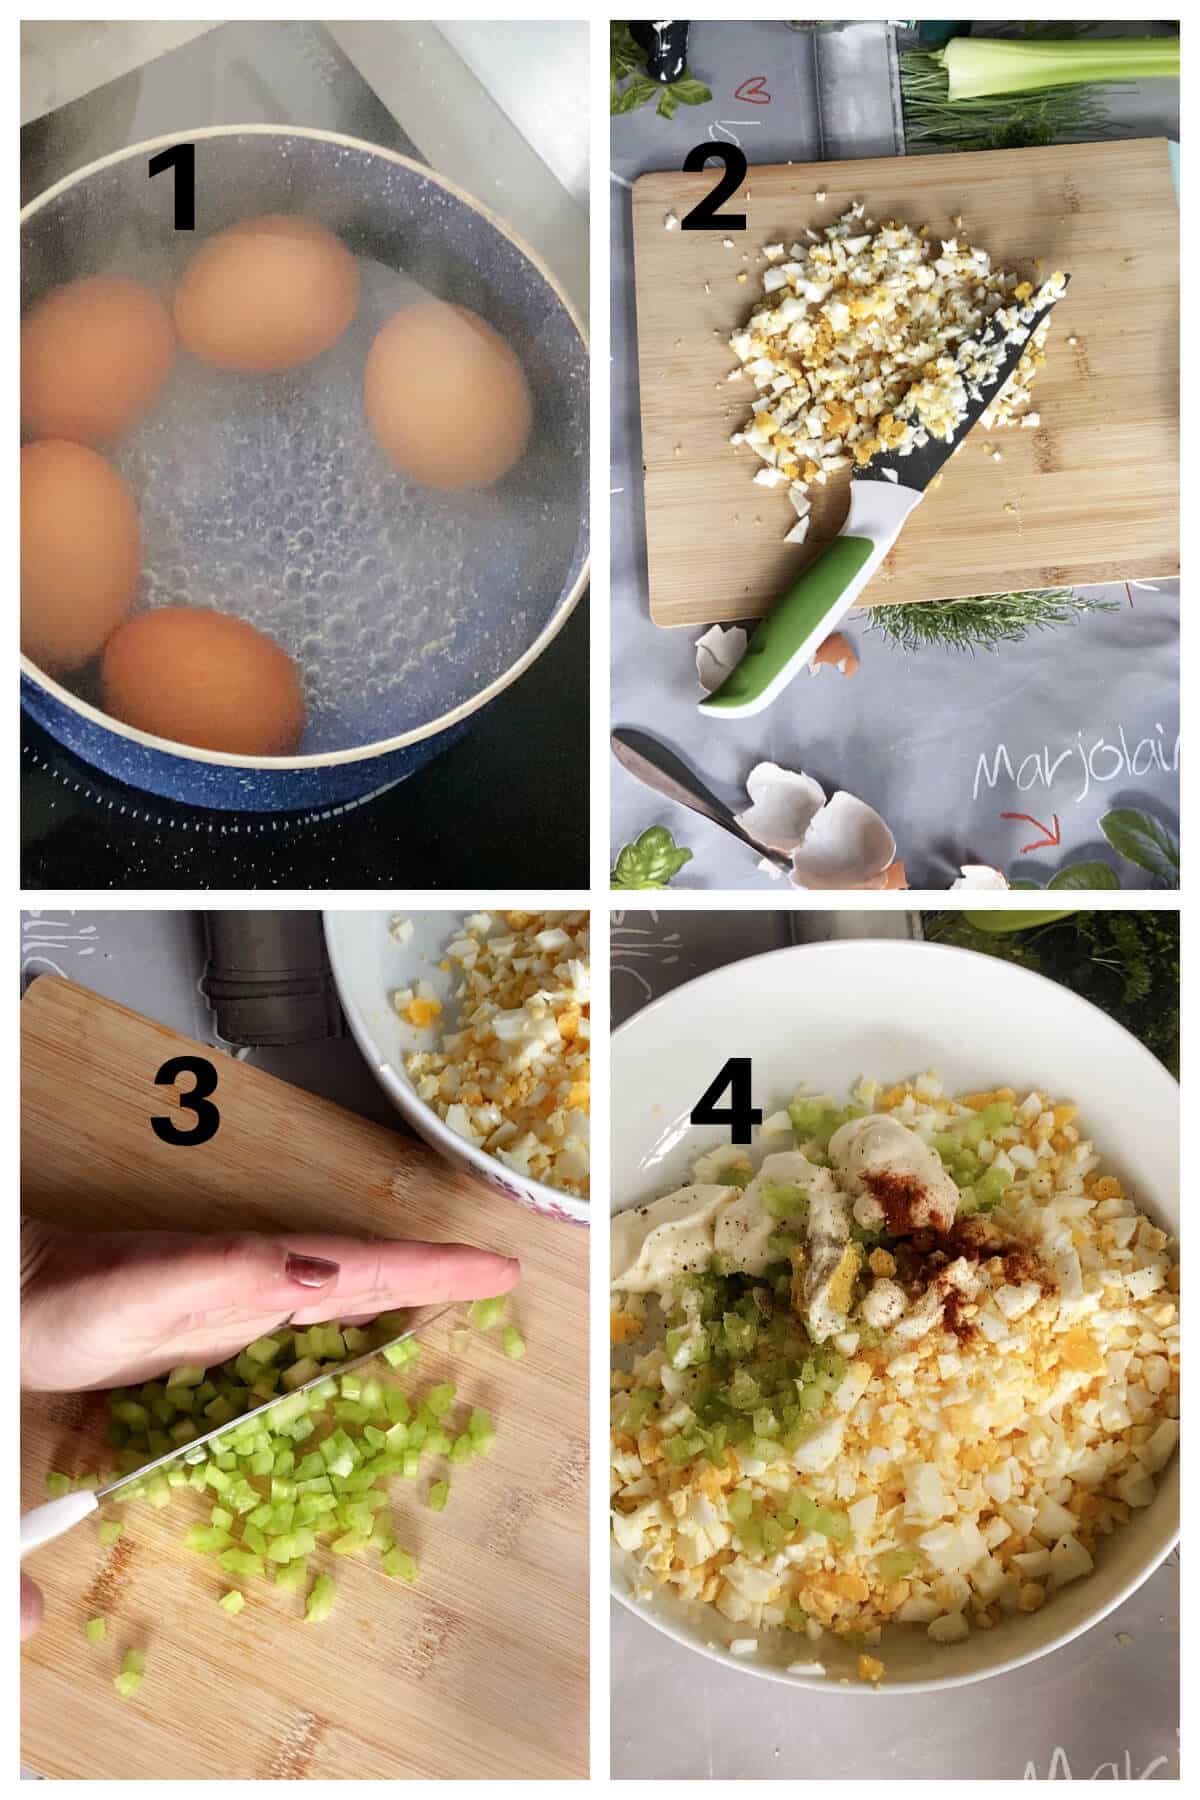 Collage of 4 photos to show how to make deviled egg sandwich.